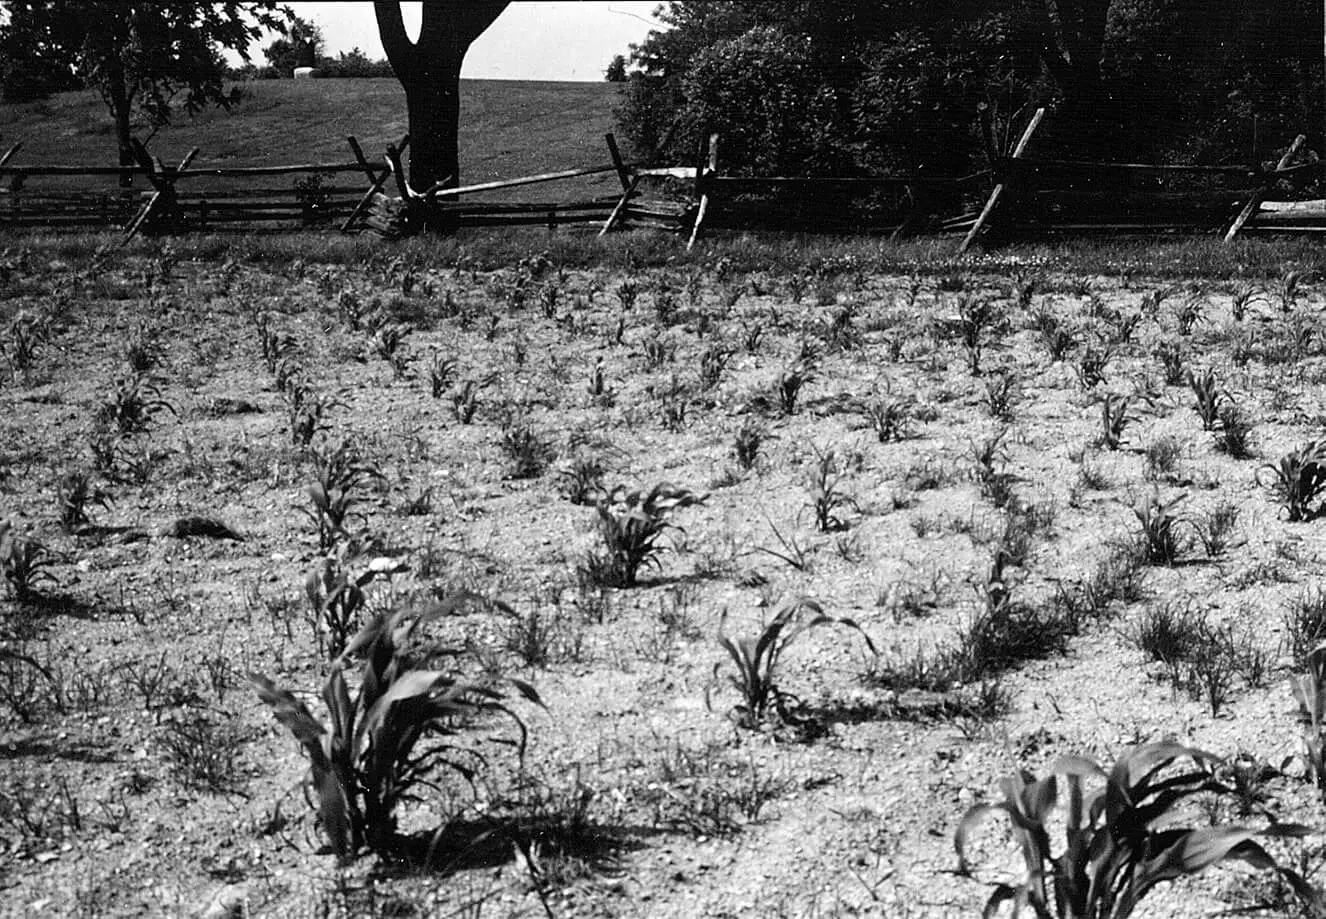 Black and white photograph of farmland with corn planted evenly in columns and rows in the foreground. Some weeds are growing between the stalks. A wooden fence is visible in the background.